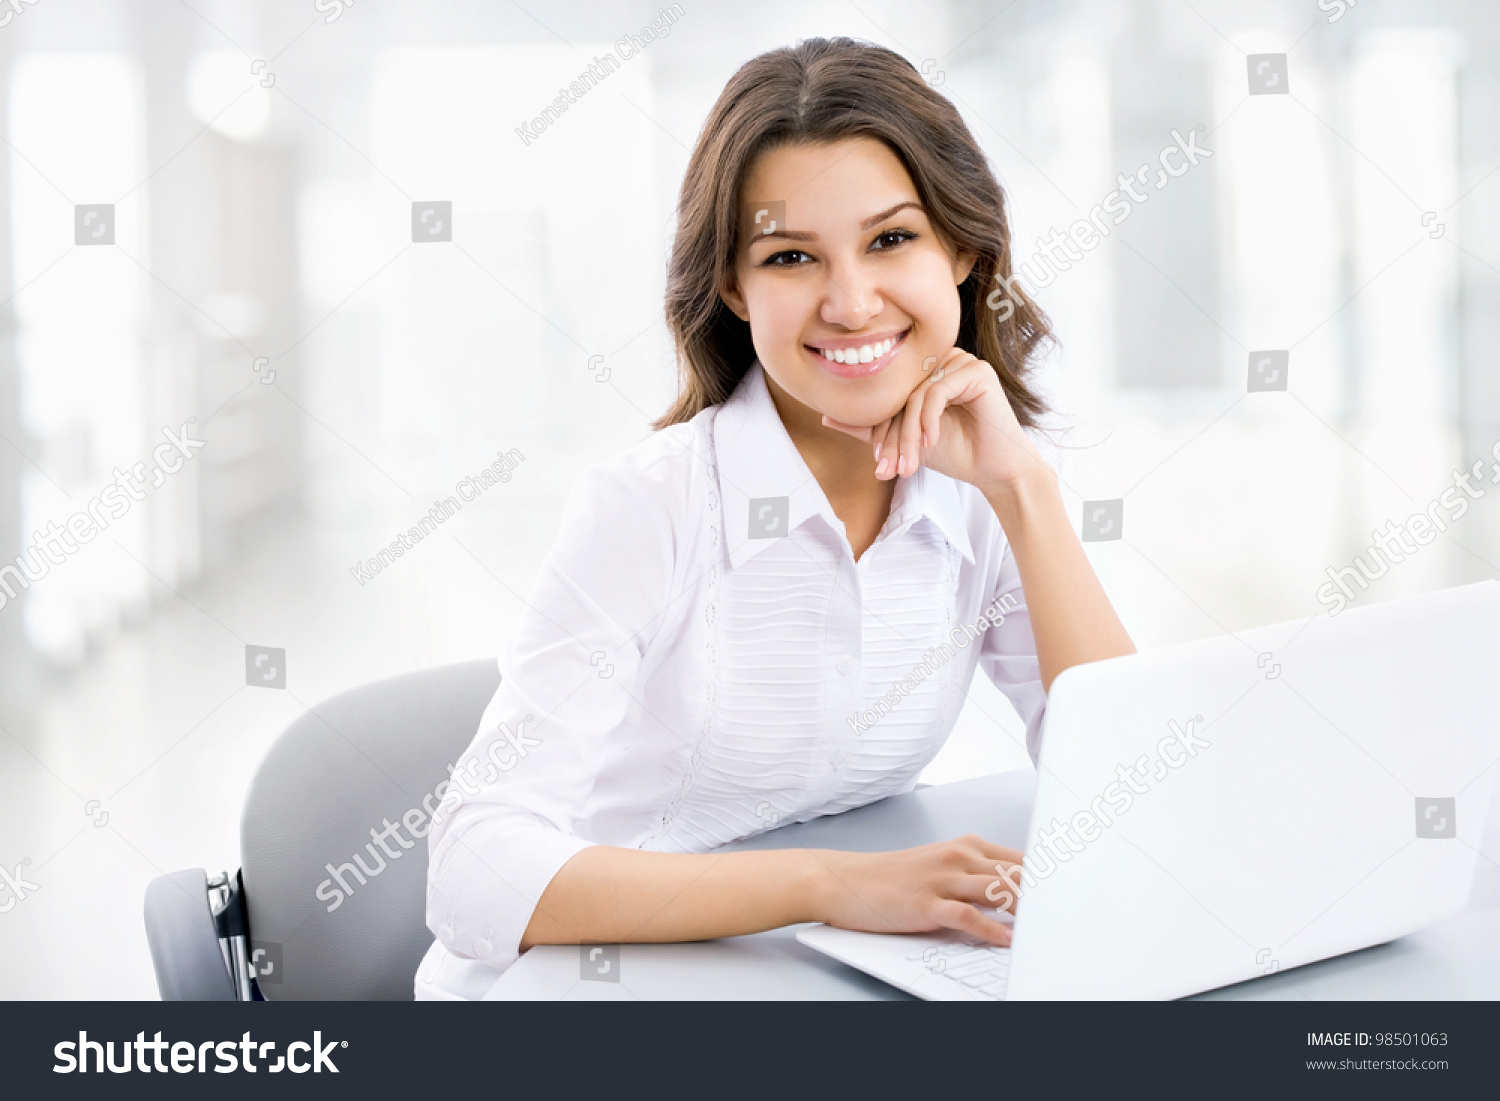 Business Woman Working On Laptop Computer Stock Photo 98501063 ...